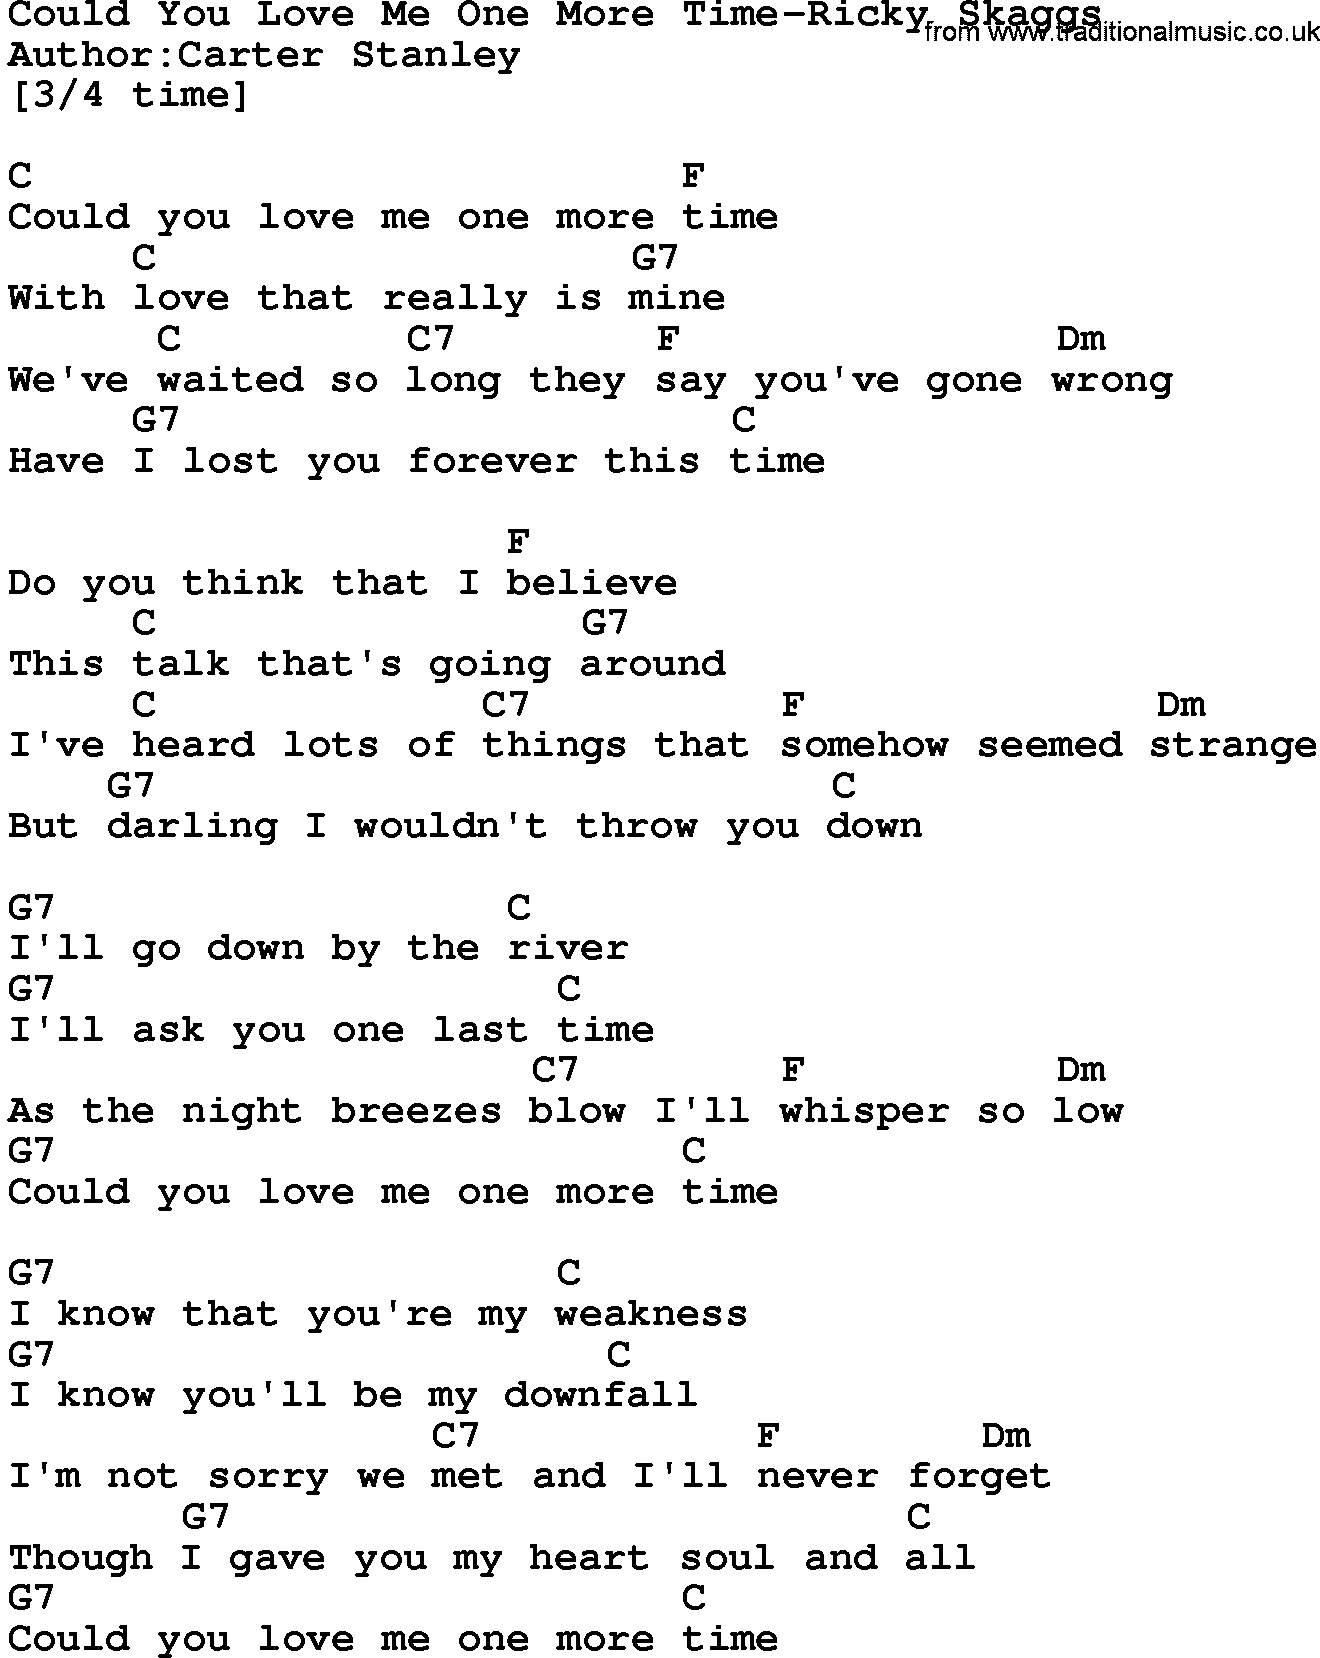 Country music song: Could You Love Me One More Time-Ricky Skaggs lyrics and chords